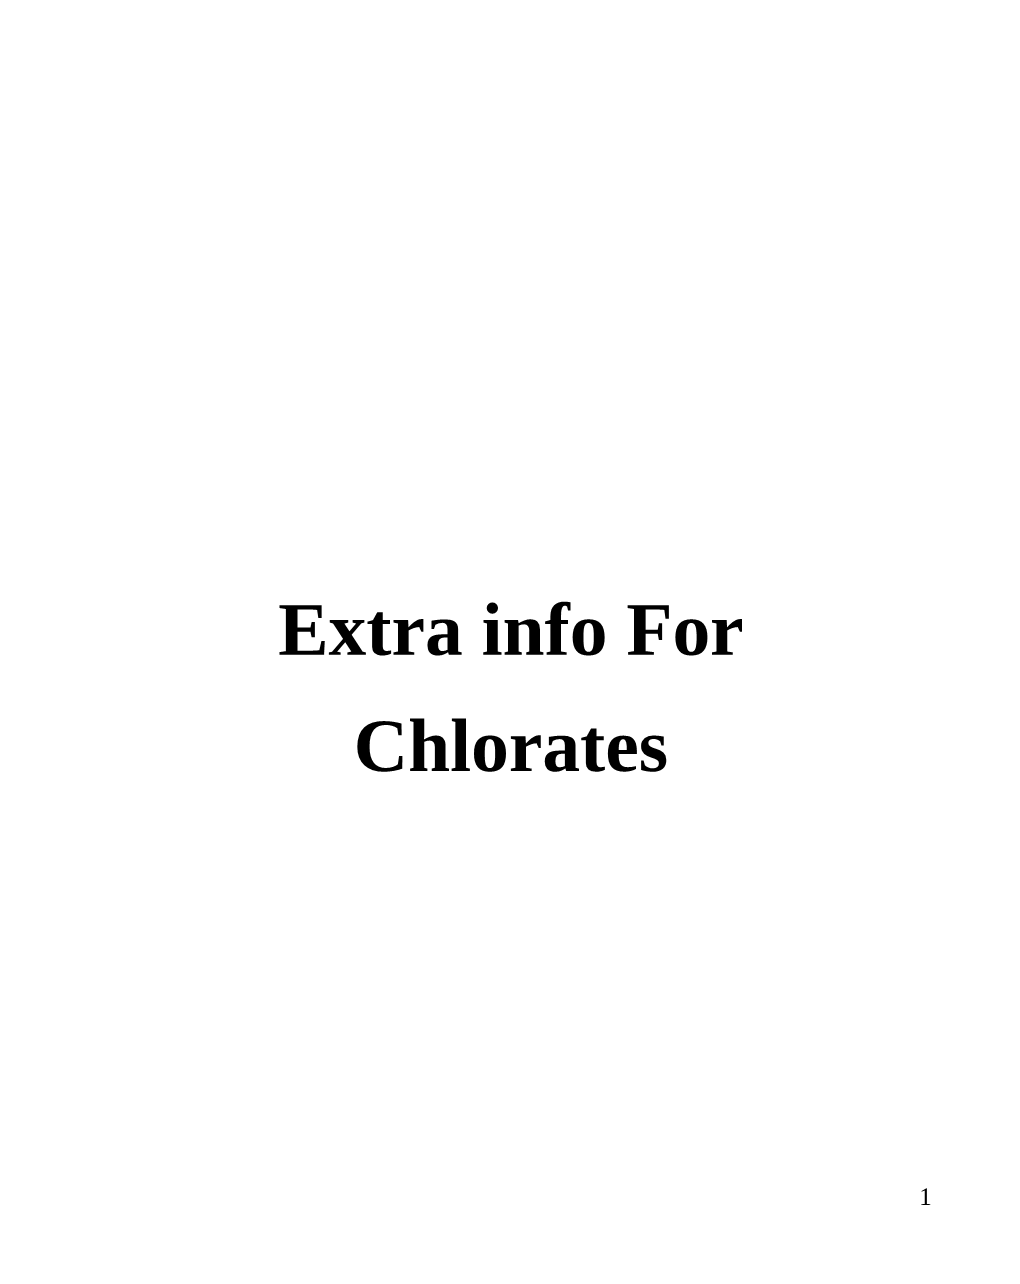 Extra Info for Chlorates